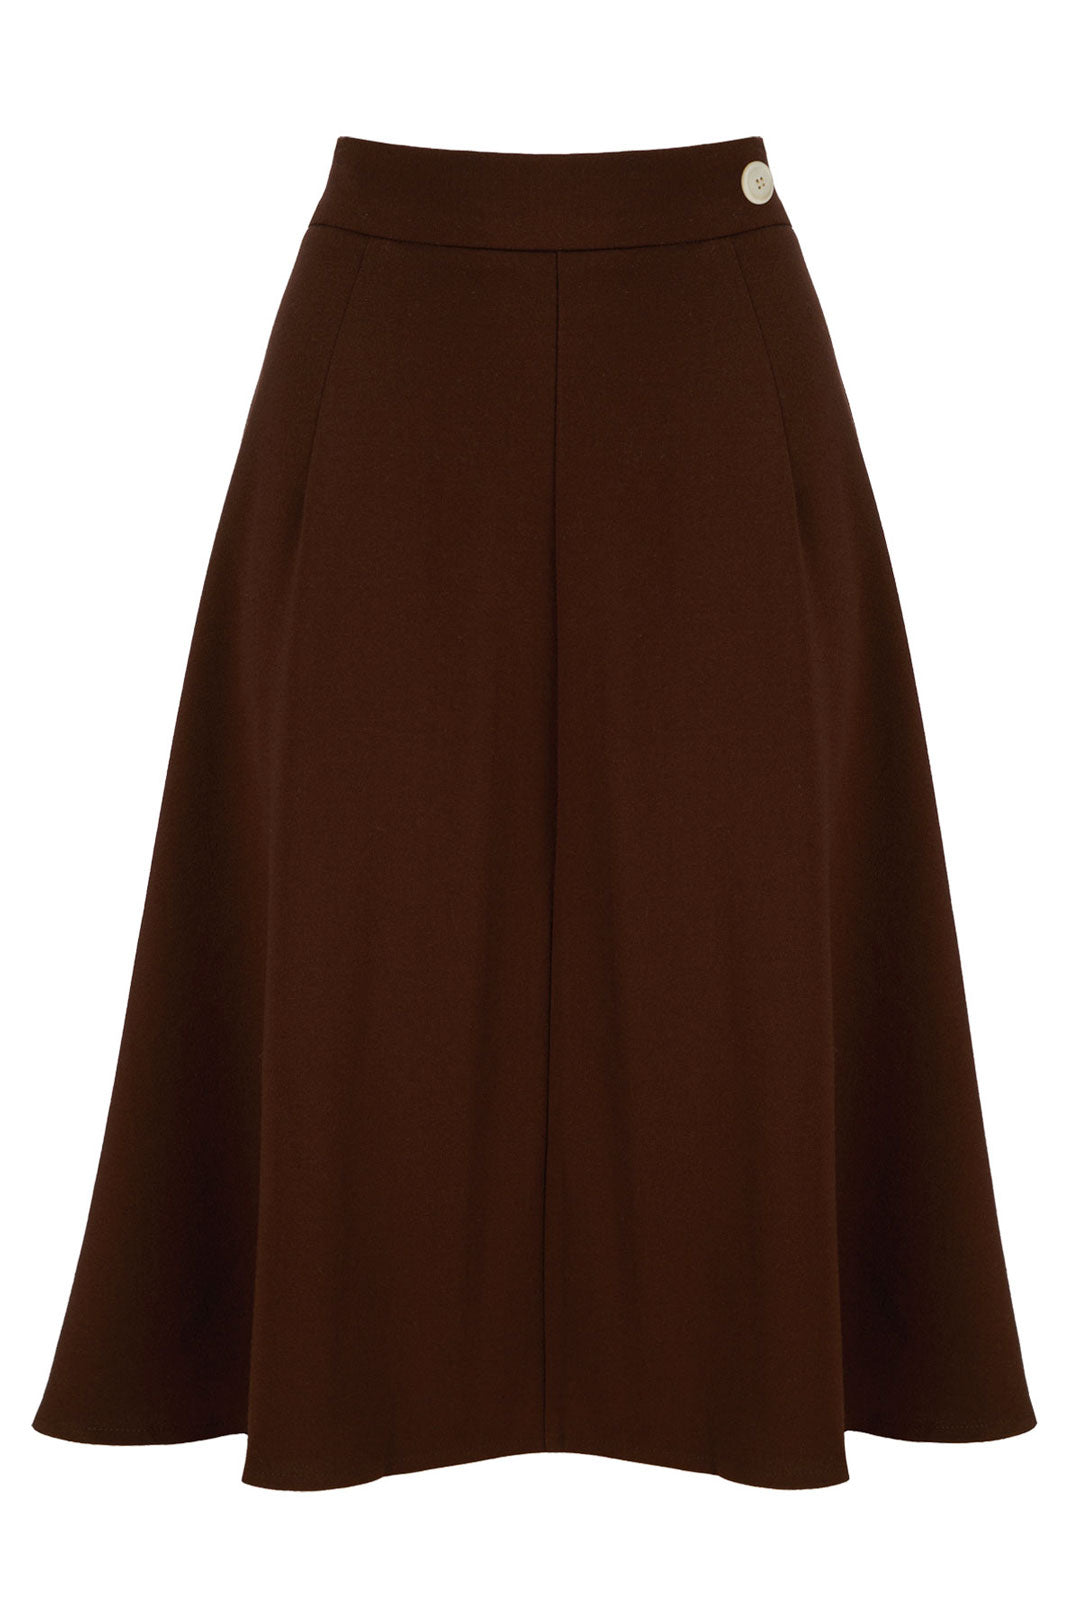 Classic 1940s Style A-Line Skirt in Brown